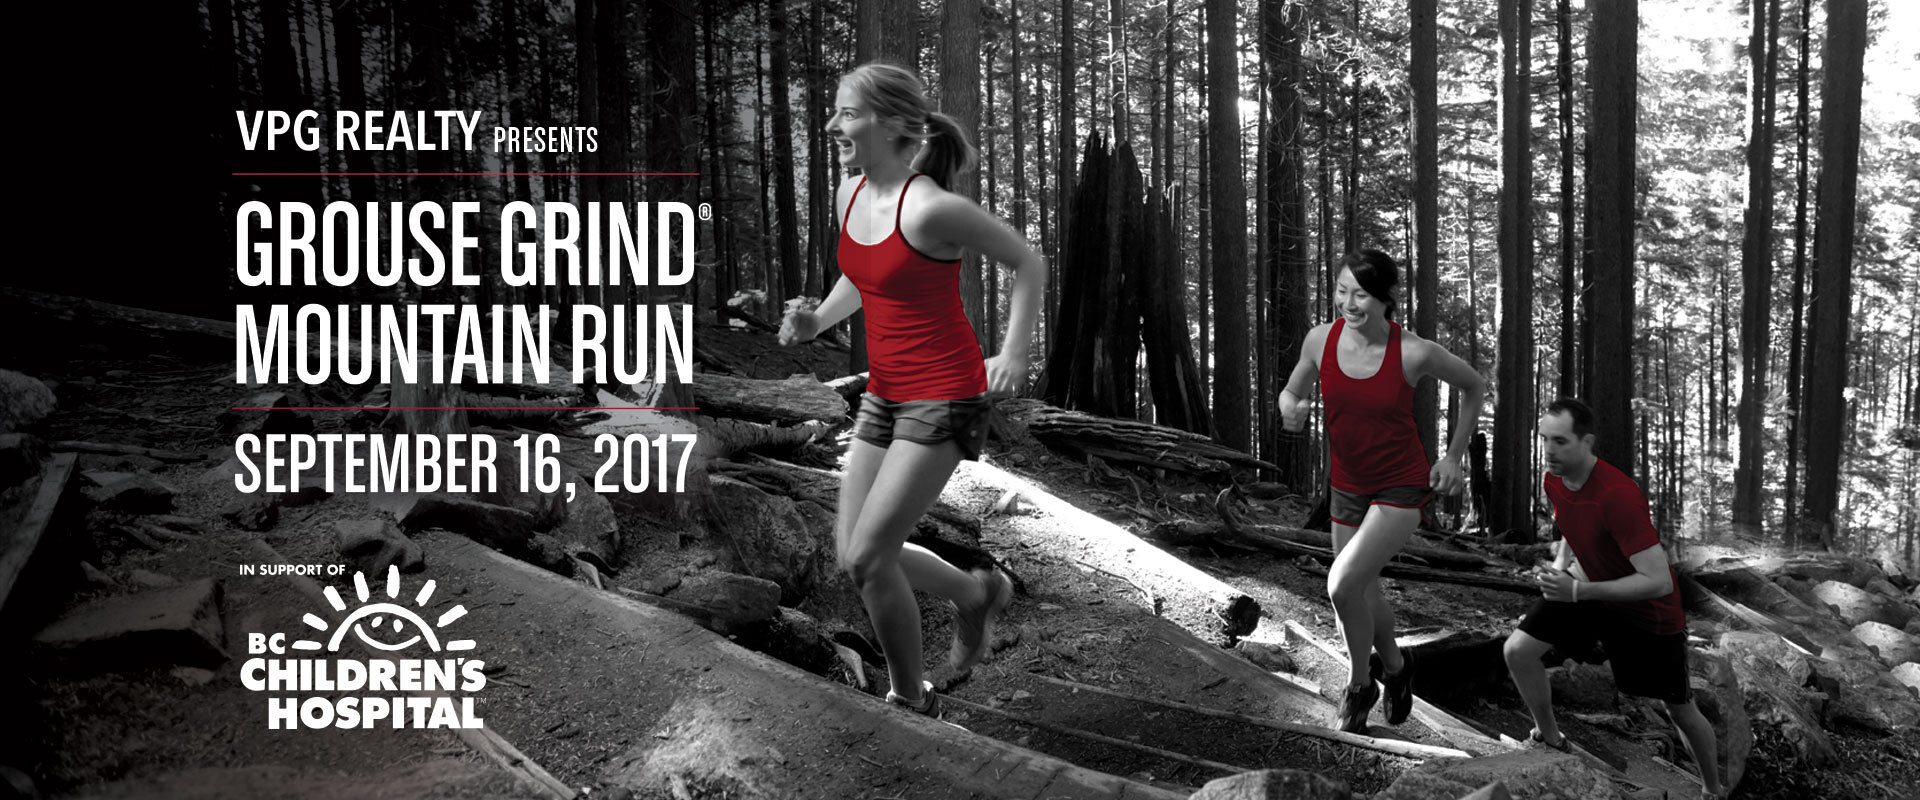 Join us September 16th for the Grouse Grind Mountain Run